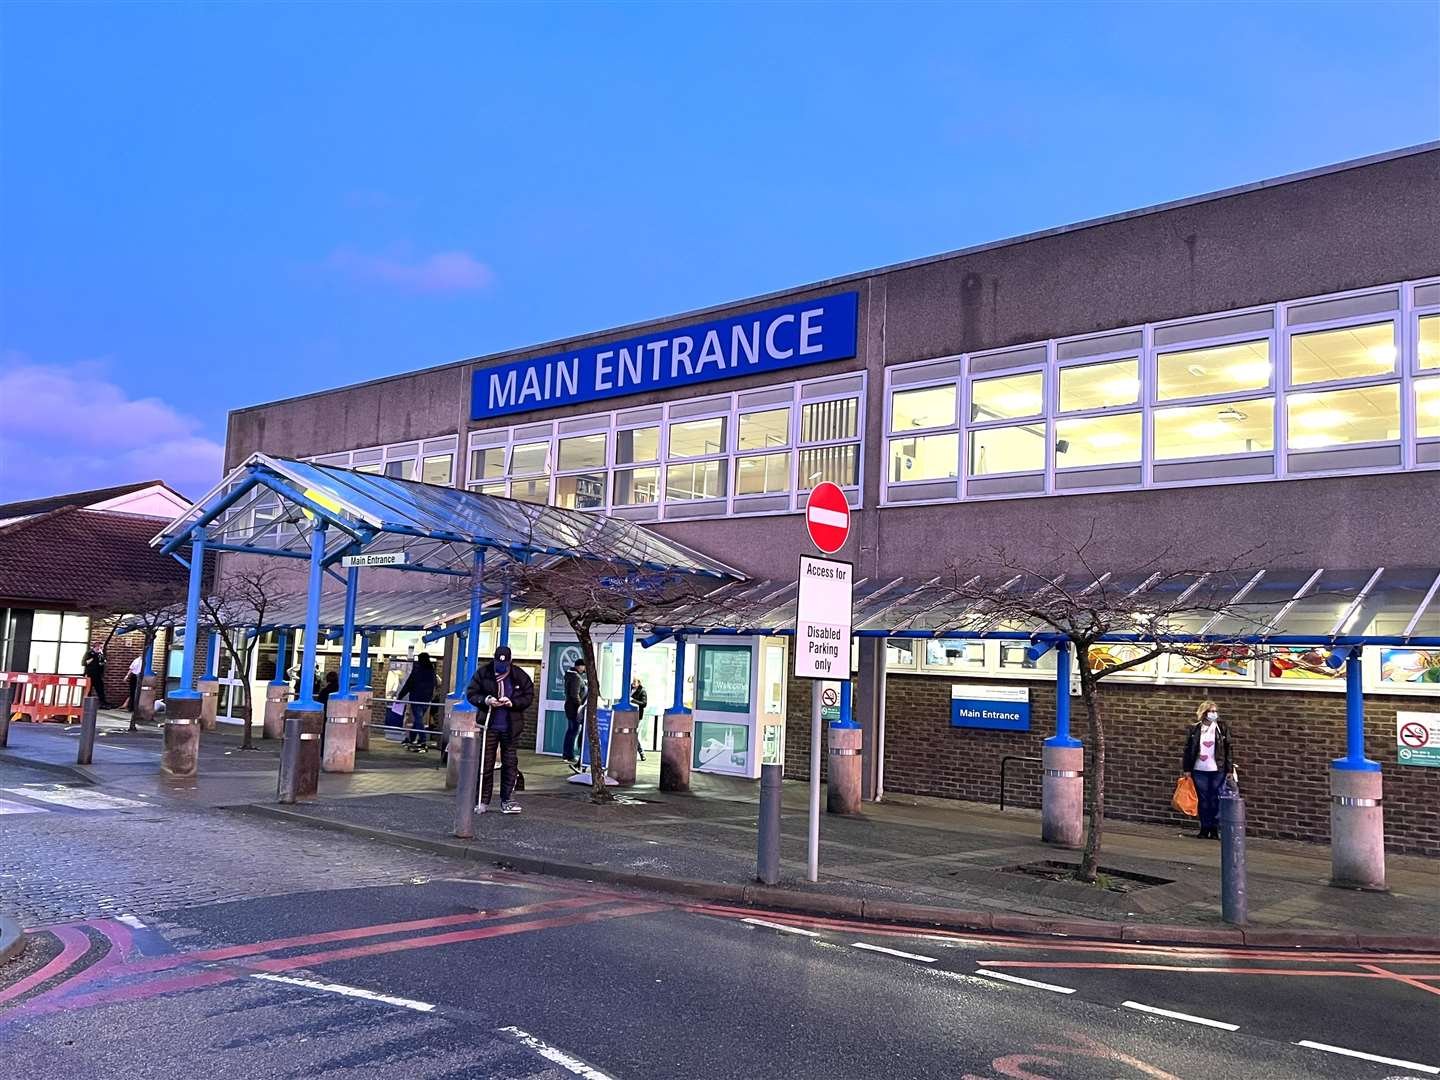 The William Harvey in Ashford is part of the East Kent Hospitals trust, which has seen a 26% increase in patient numbers in a week. Picture: Barry Goodwin